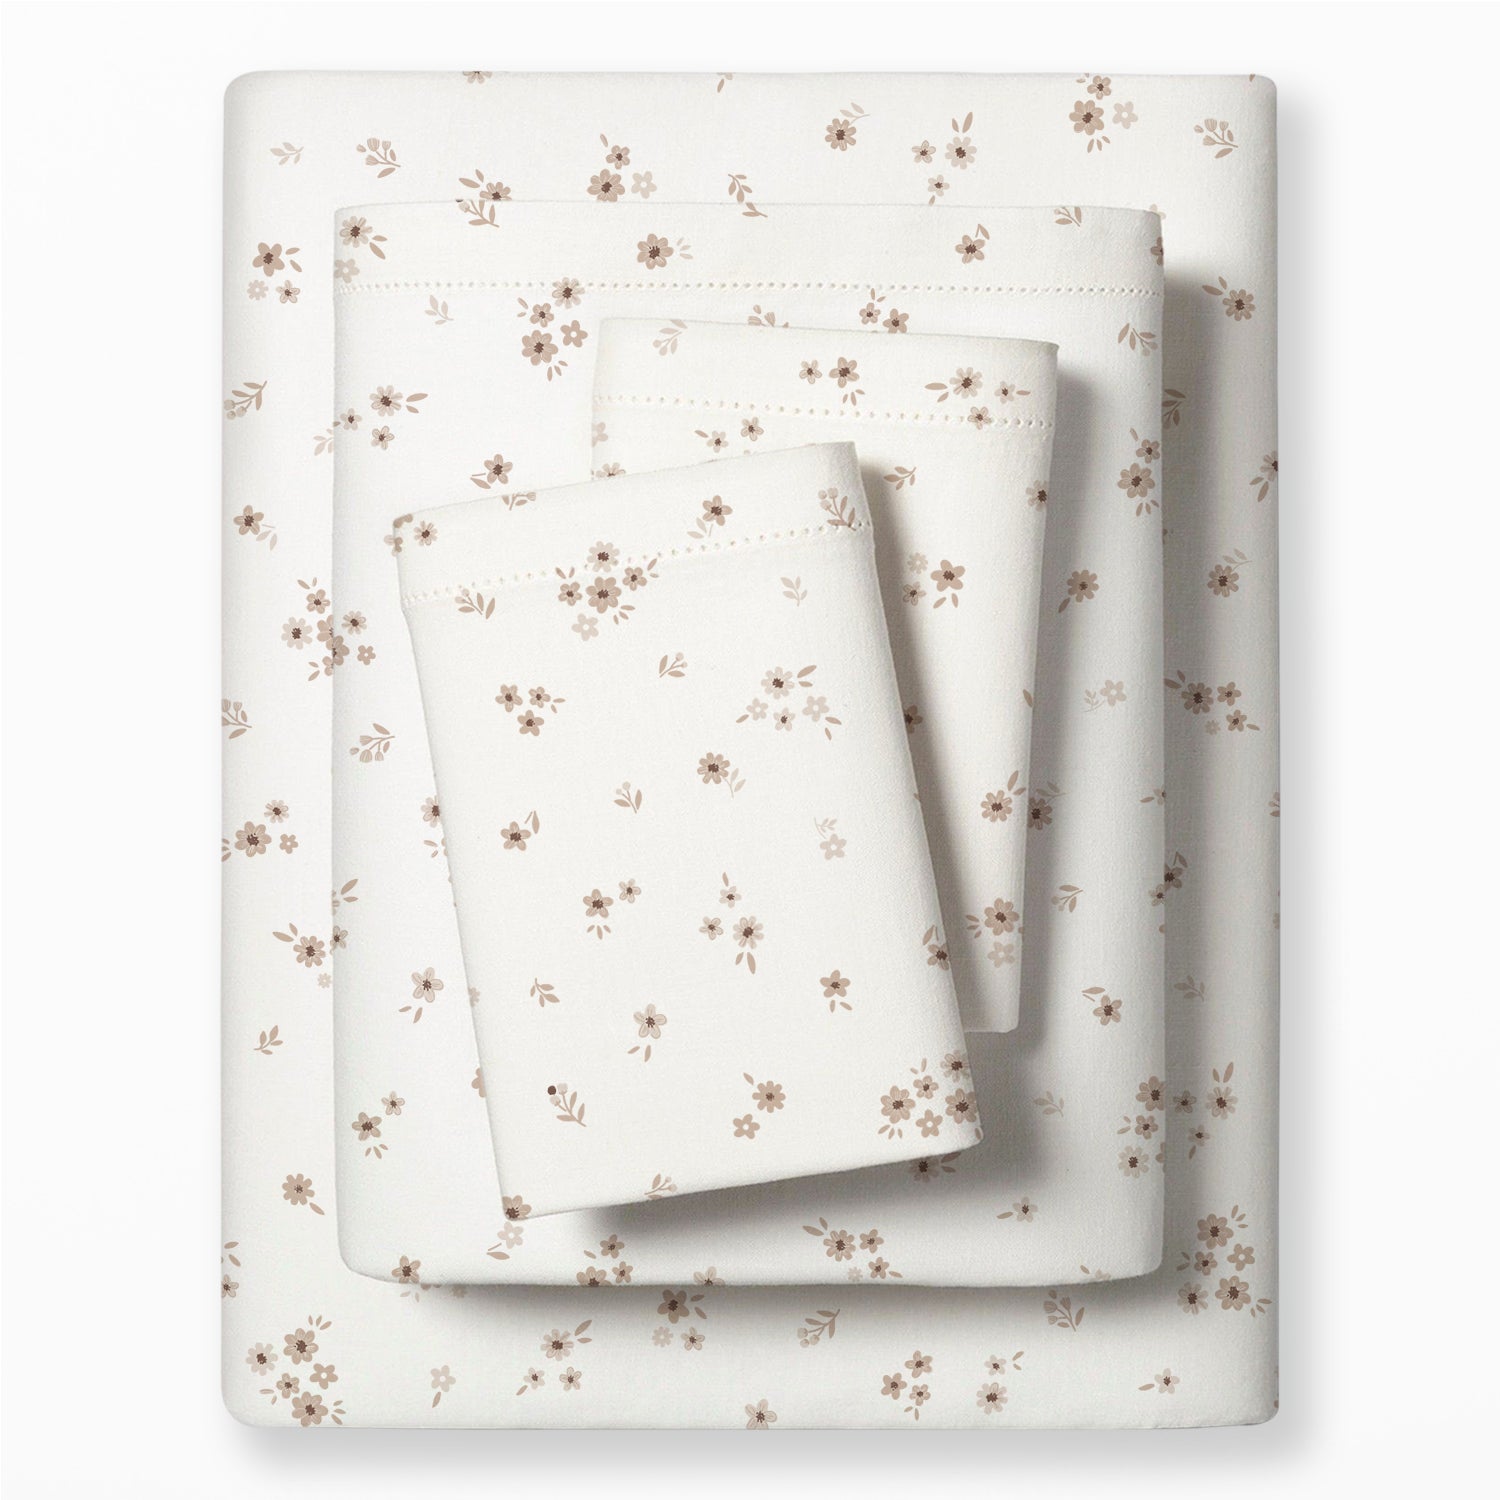 A neatly folded set of cream-colored bedding with a delicate brown floral pattern, consisting of a fitted sheet, flat sheet, and pillowcases from Makemake Organics' Organic Cotton Sheet Set - Bloom, displayed on a white background.